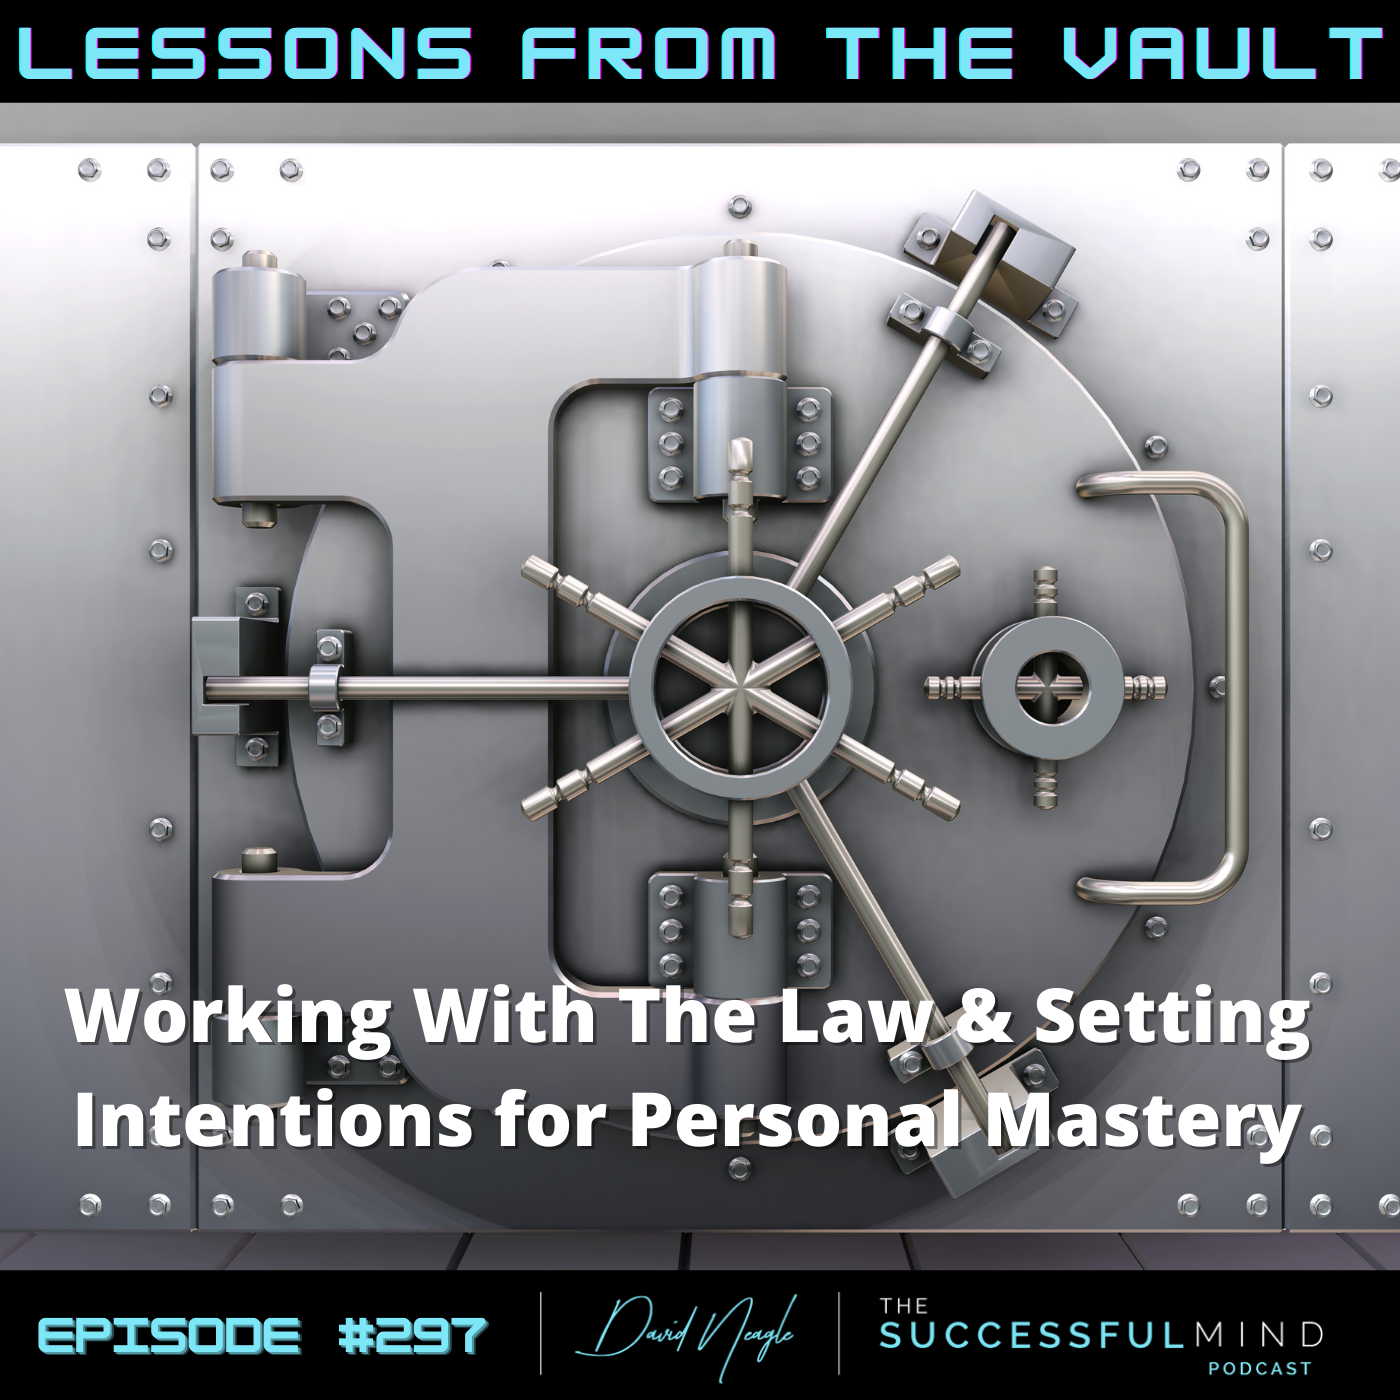 The Successful Mind Podcast- Working With The Law and Setting Intentions for Personal Mastery